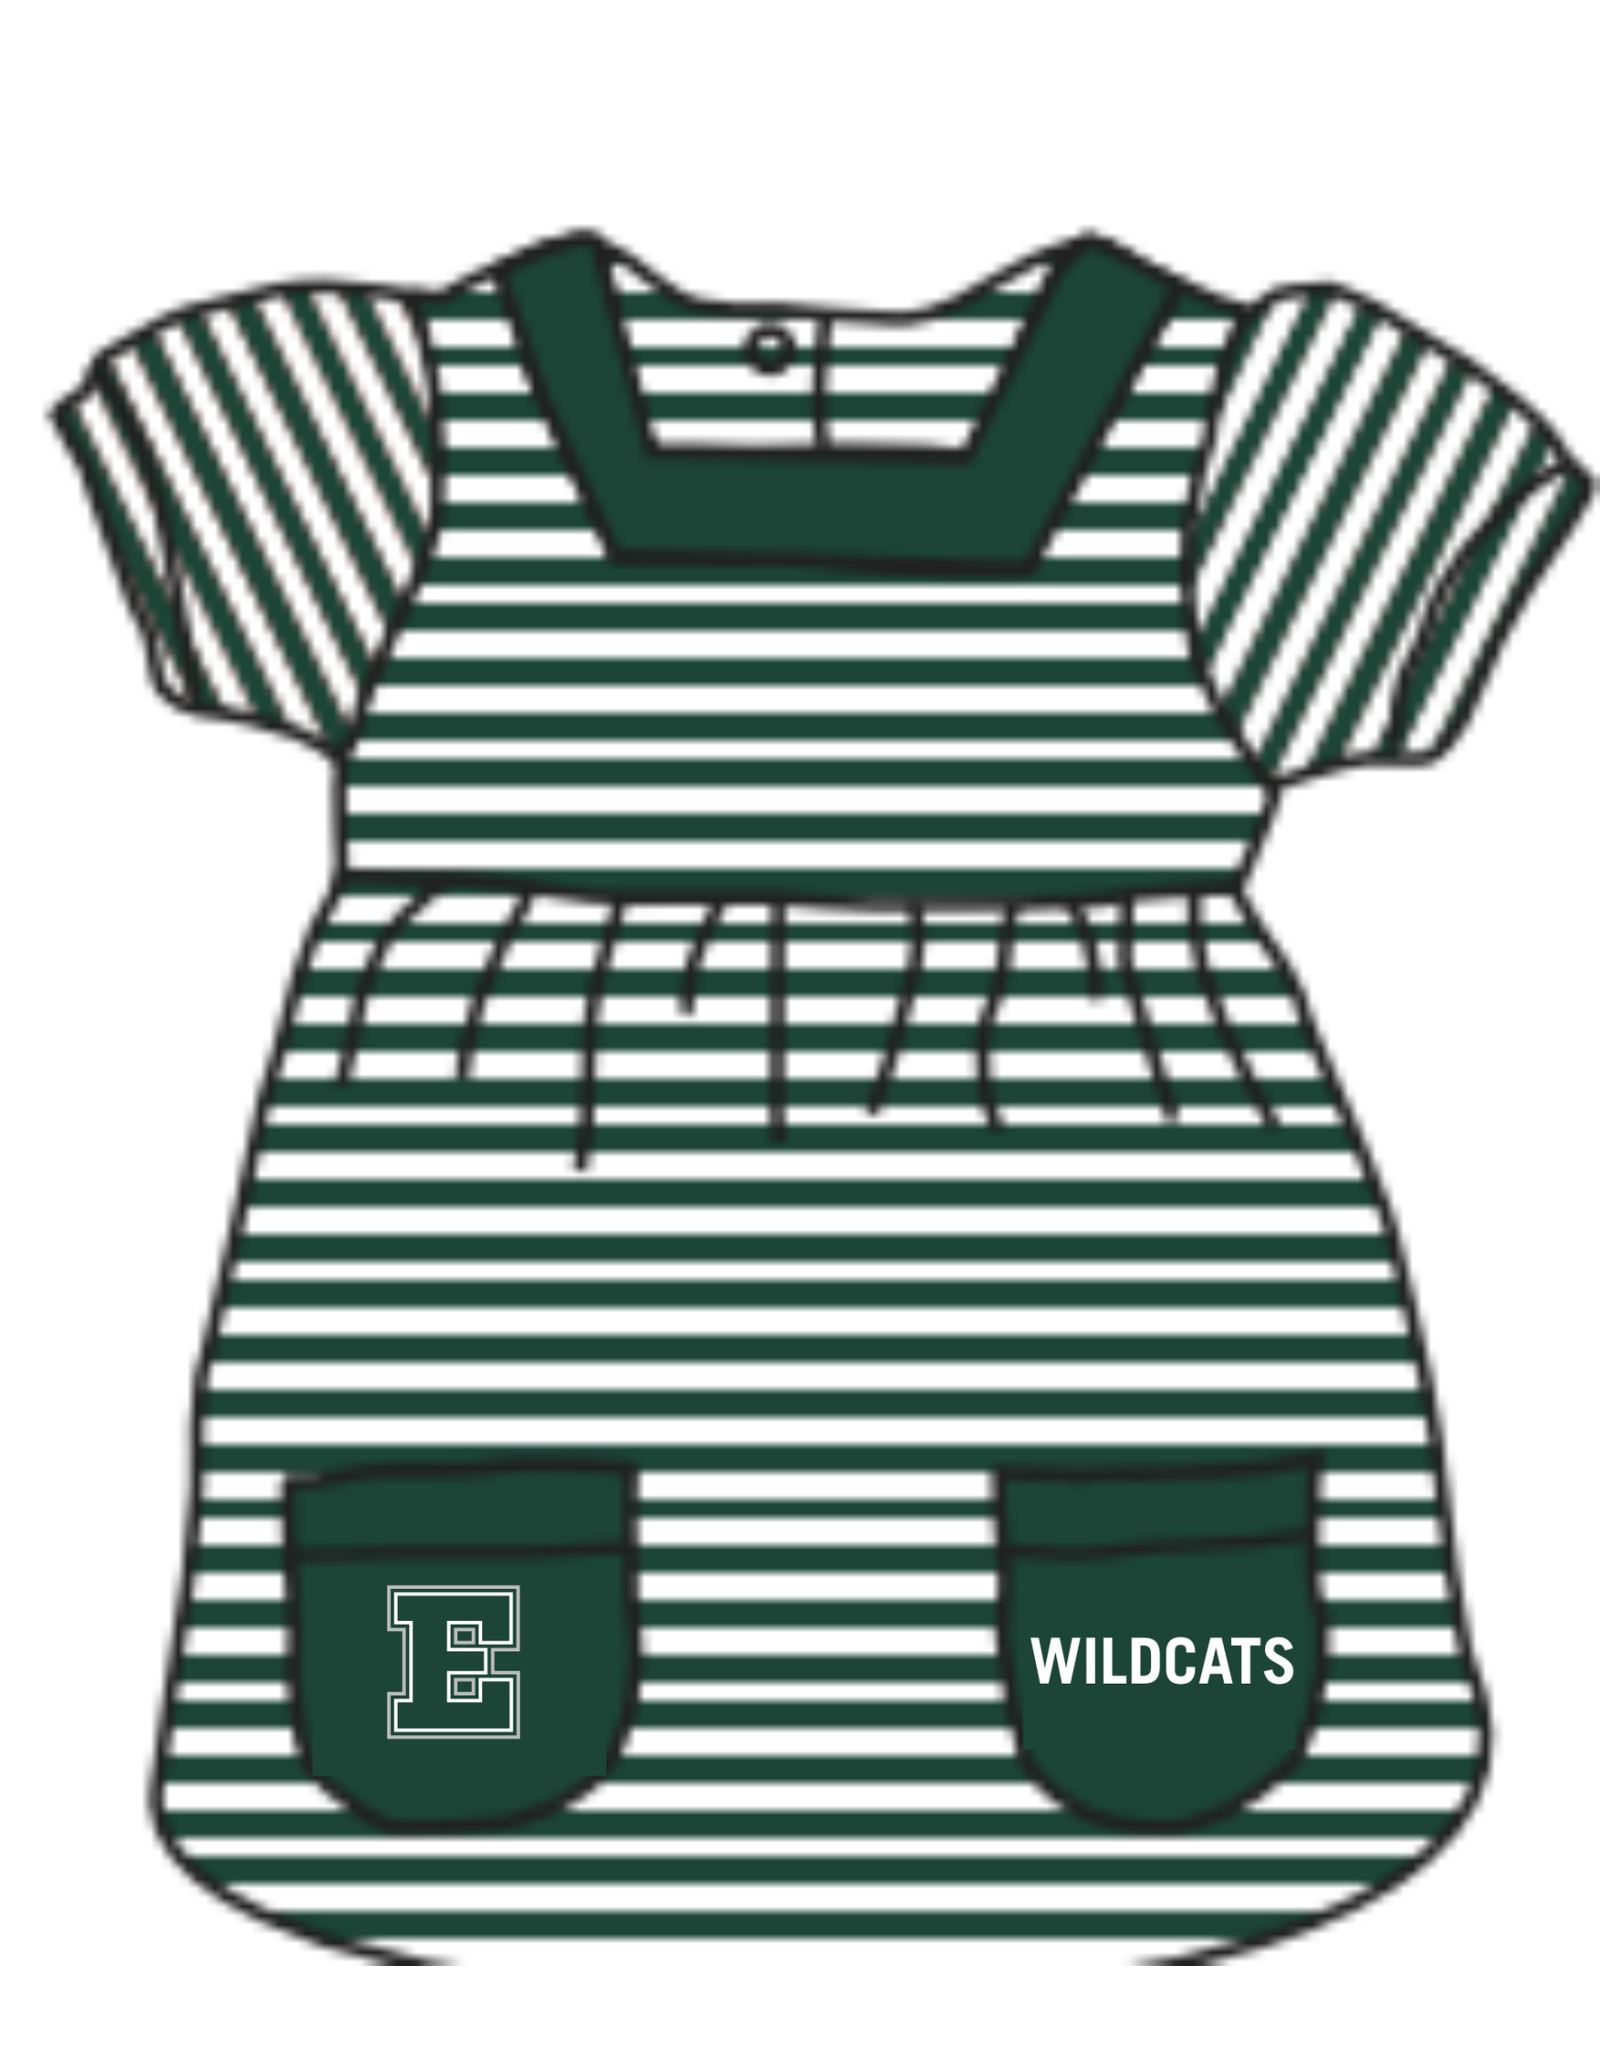 Little King Apparel Stripe Dress with Pockets Style1976 - Toddler